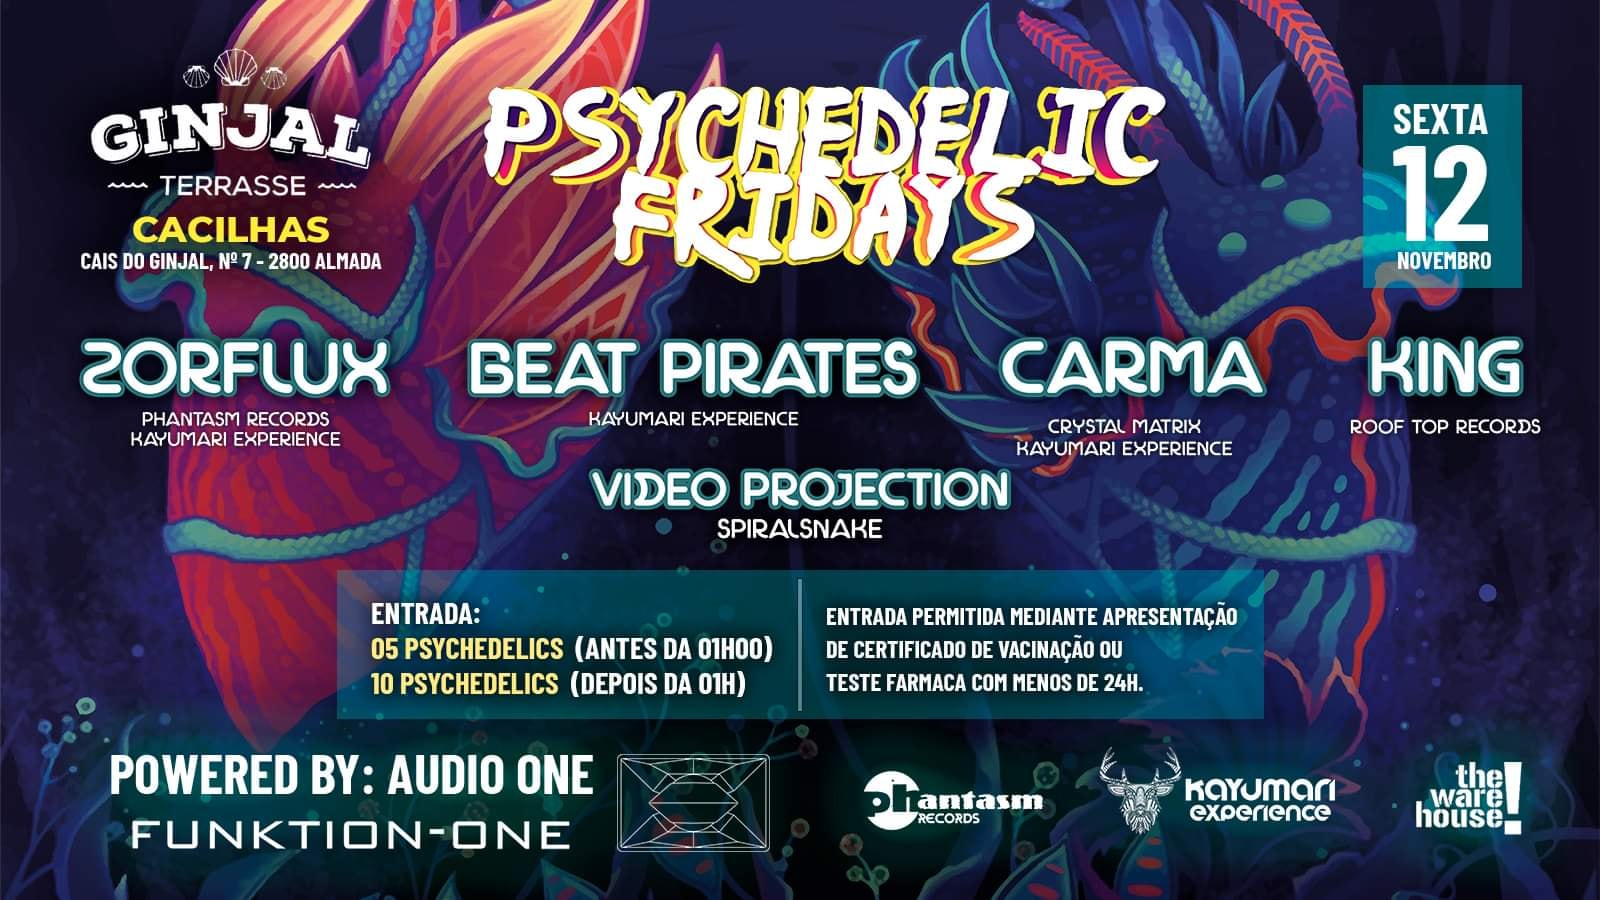 Ginjal Presents: Psychedelic Fridays